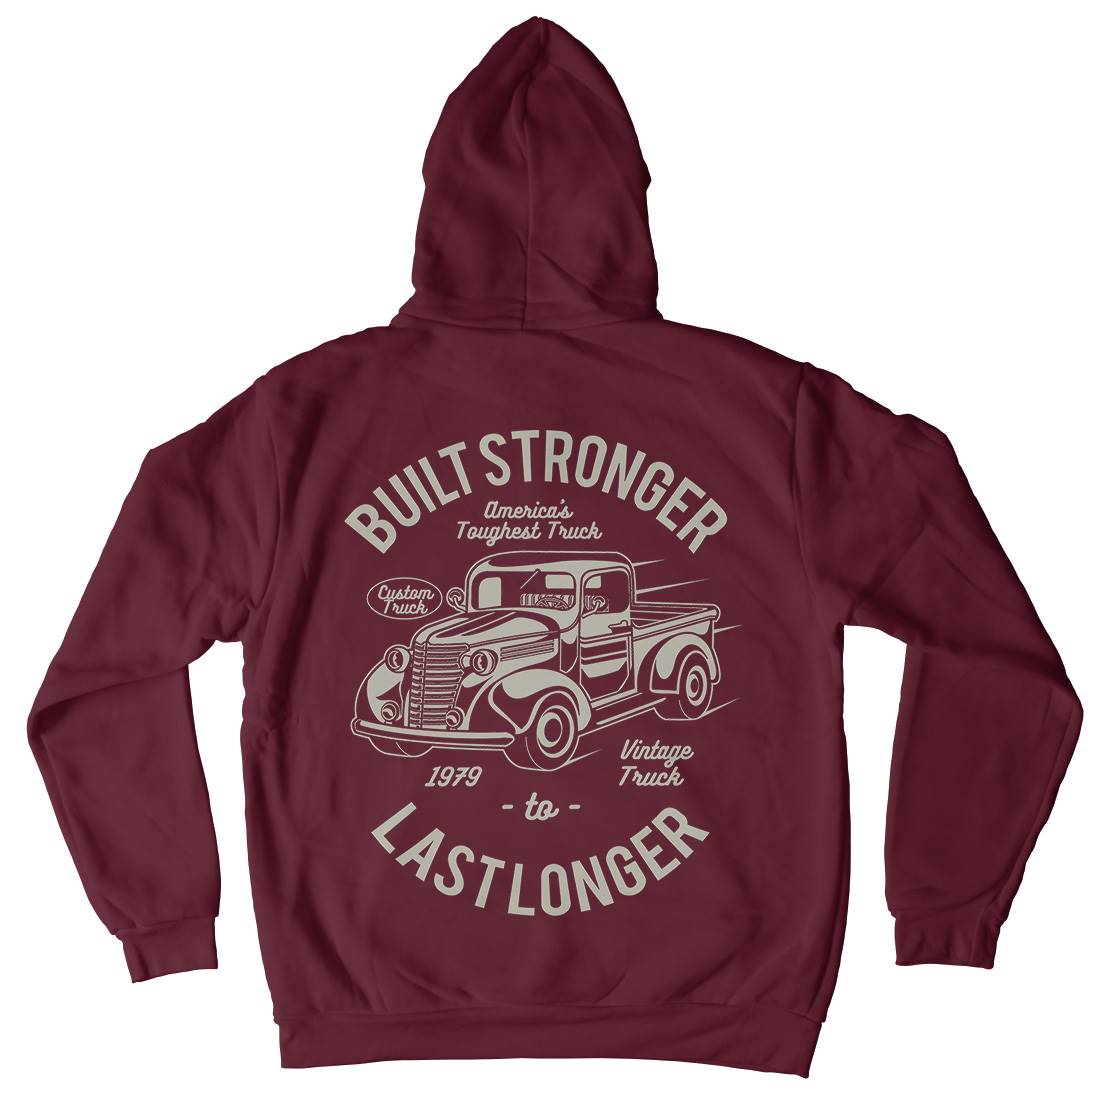 Built Stronger Mens Hoodie With Pocket Cars A023